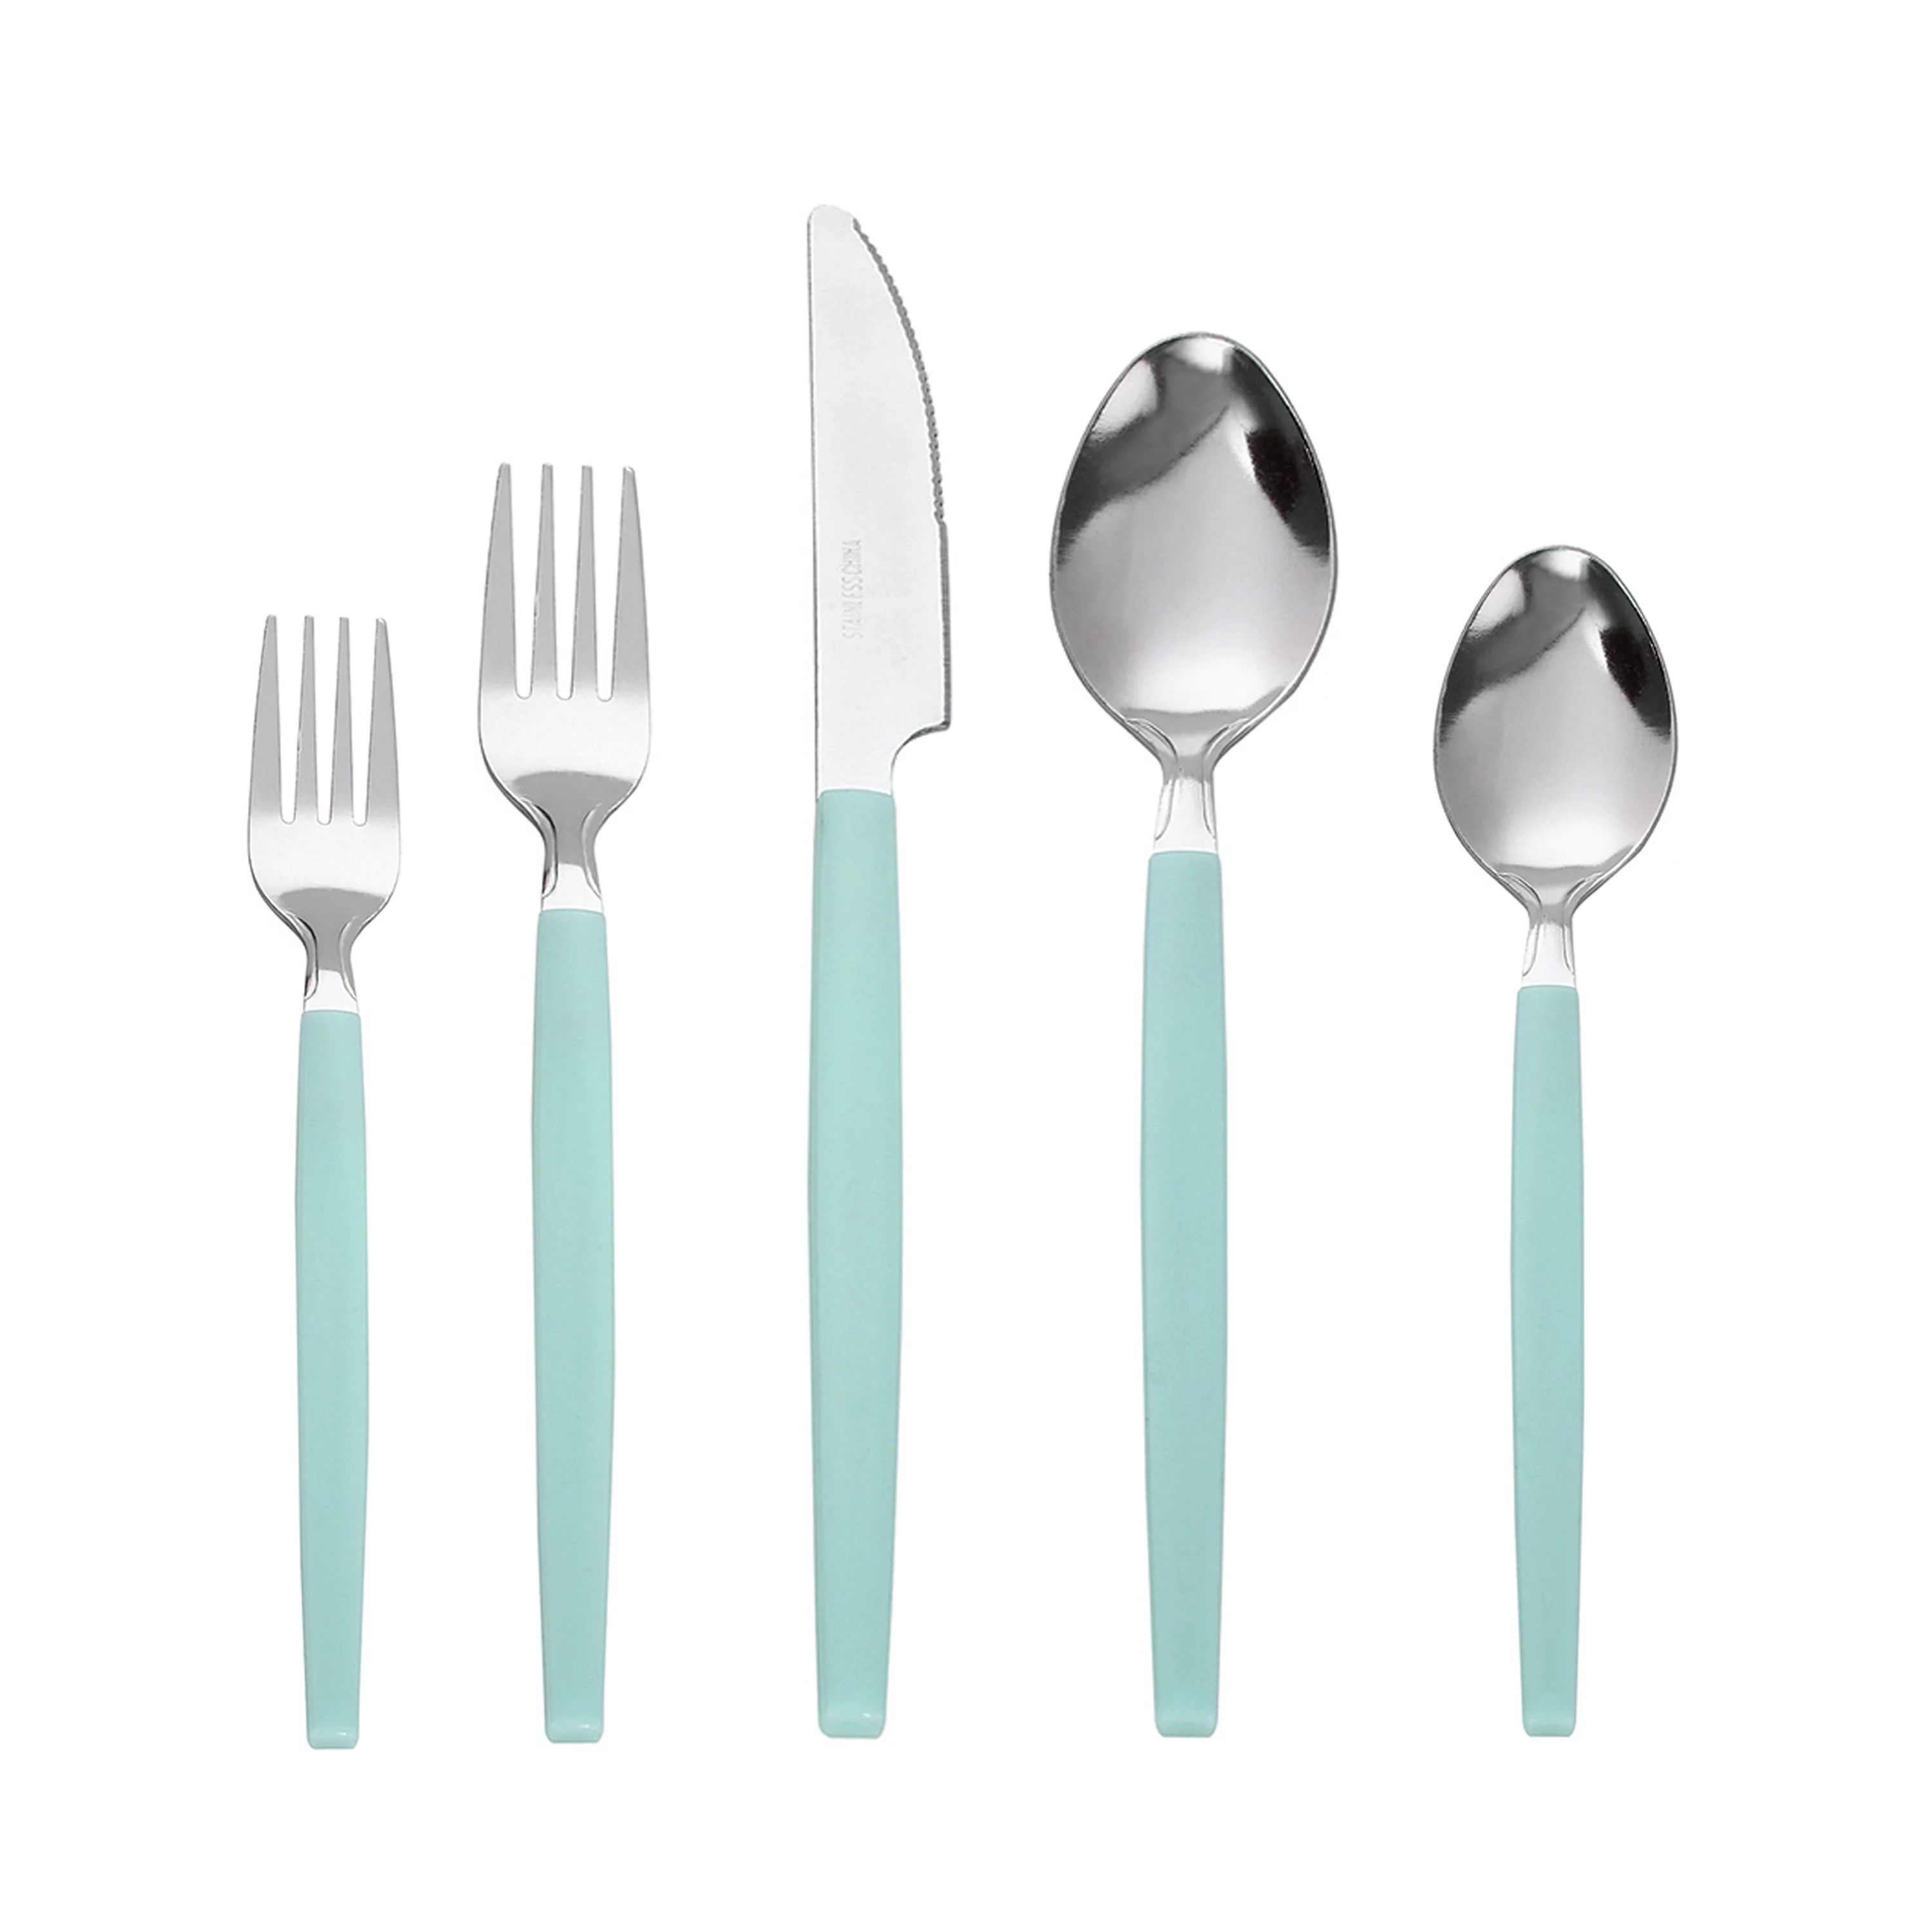 Mainstays 49-piece Stainless Steel and Plastic Flatware Set with Tray, Aquifer/Teal | Walmart (US)